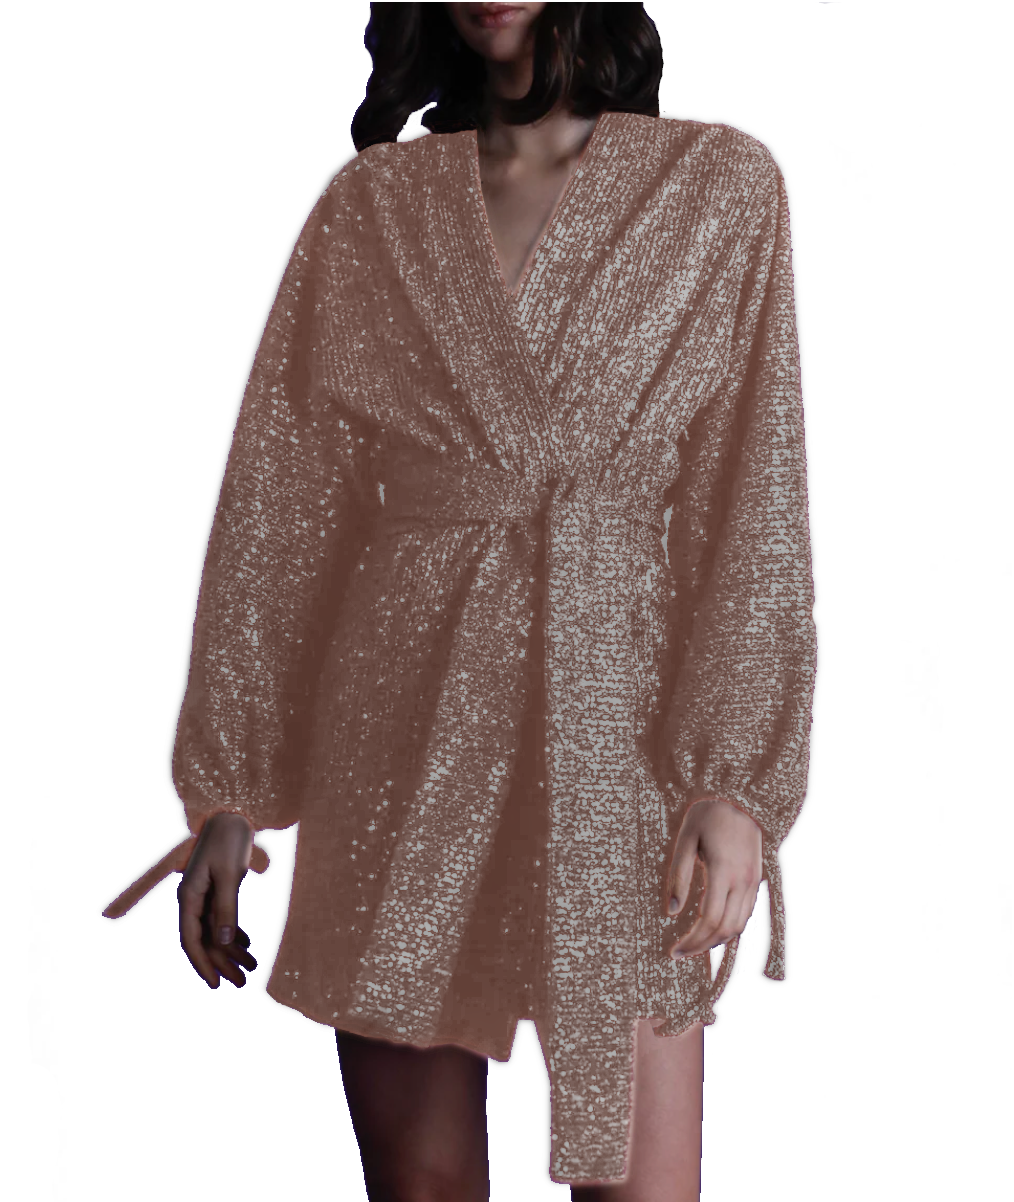 ELVIRA - short dress with wide sleeve and sash in pink sequin